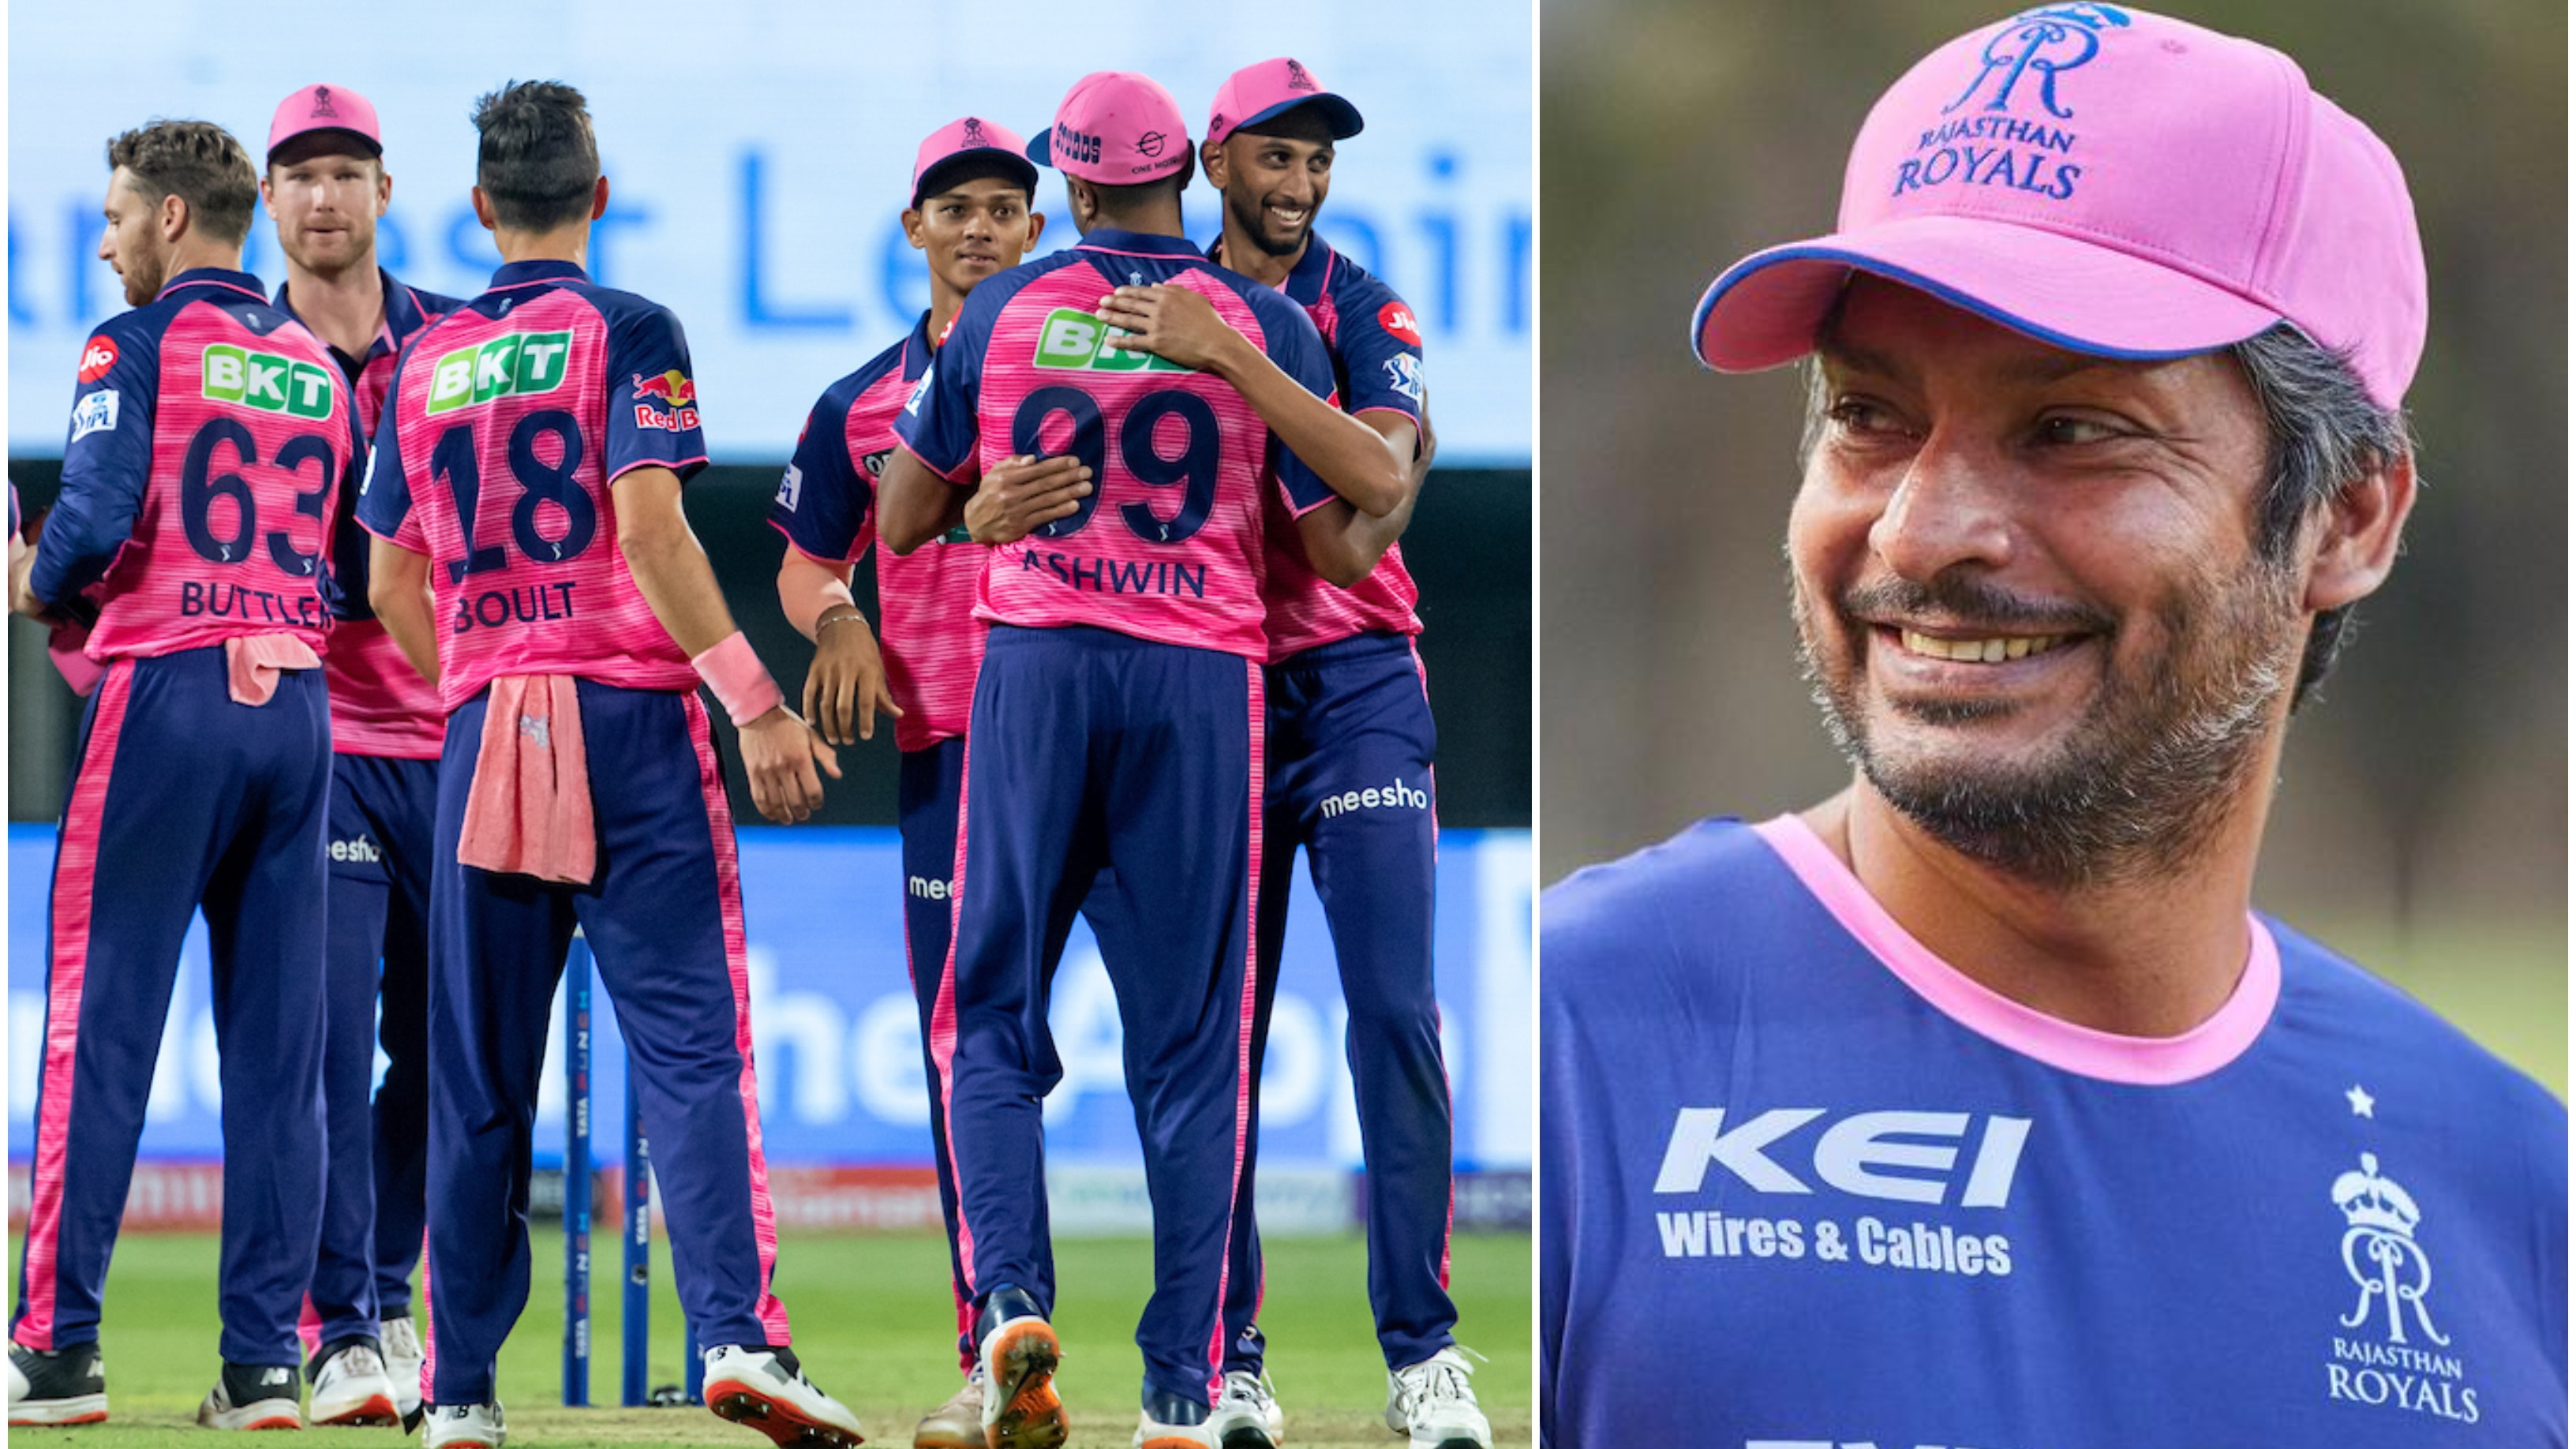 IPL 2022: Bowlers availability throughout is a great plus for RR, says Kumar Sangakkara